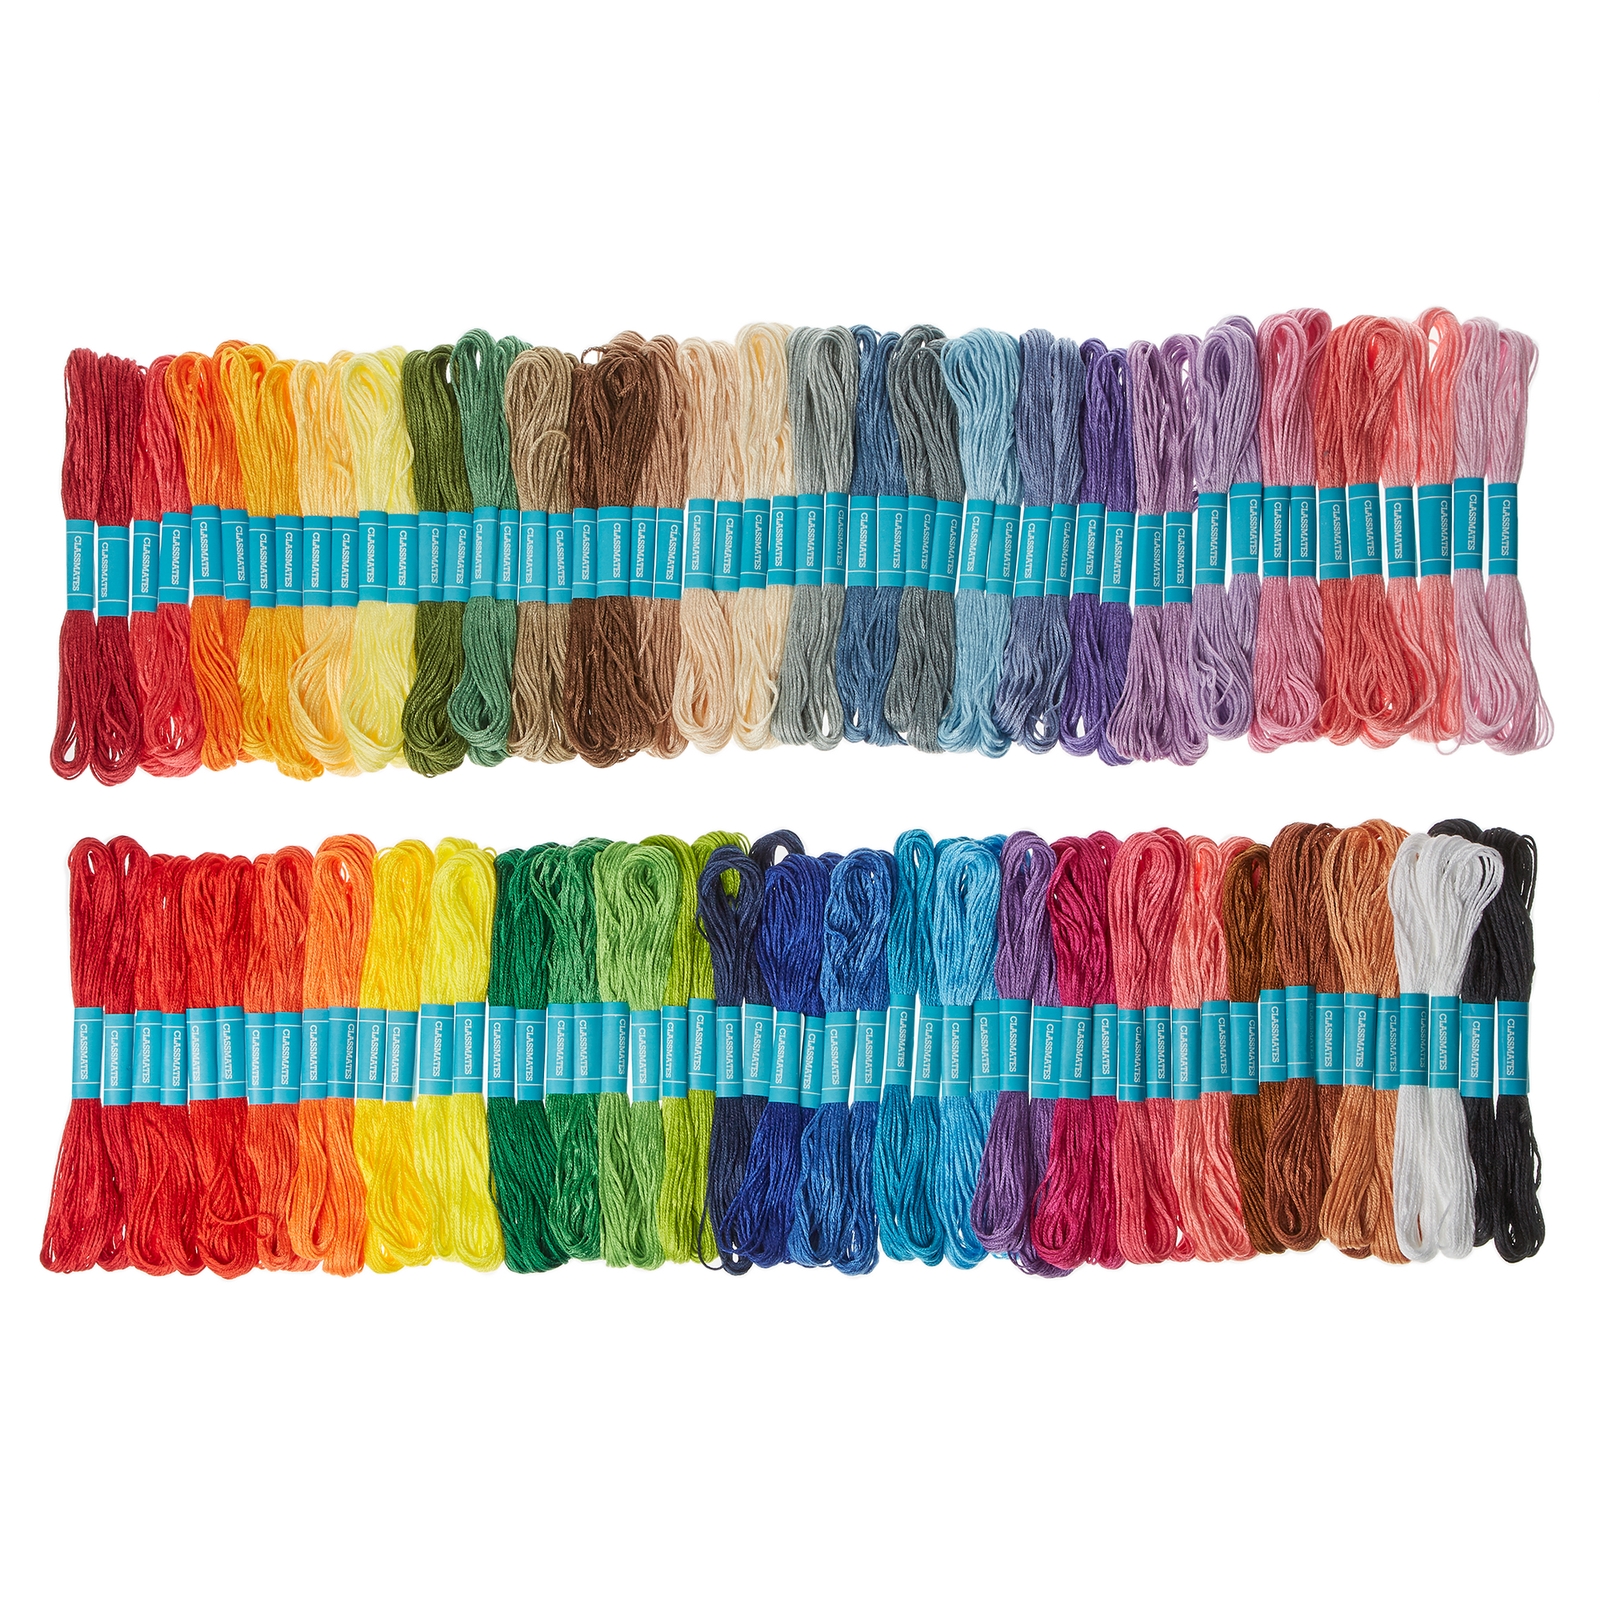 Classmates Assorted Embroidery Skeins 8m - Pack of 100